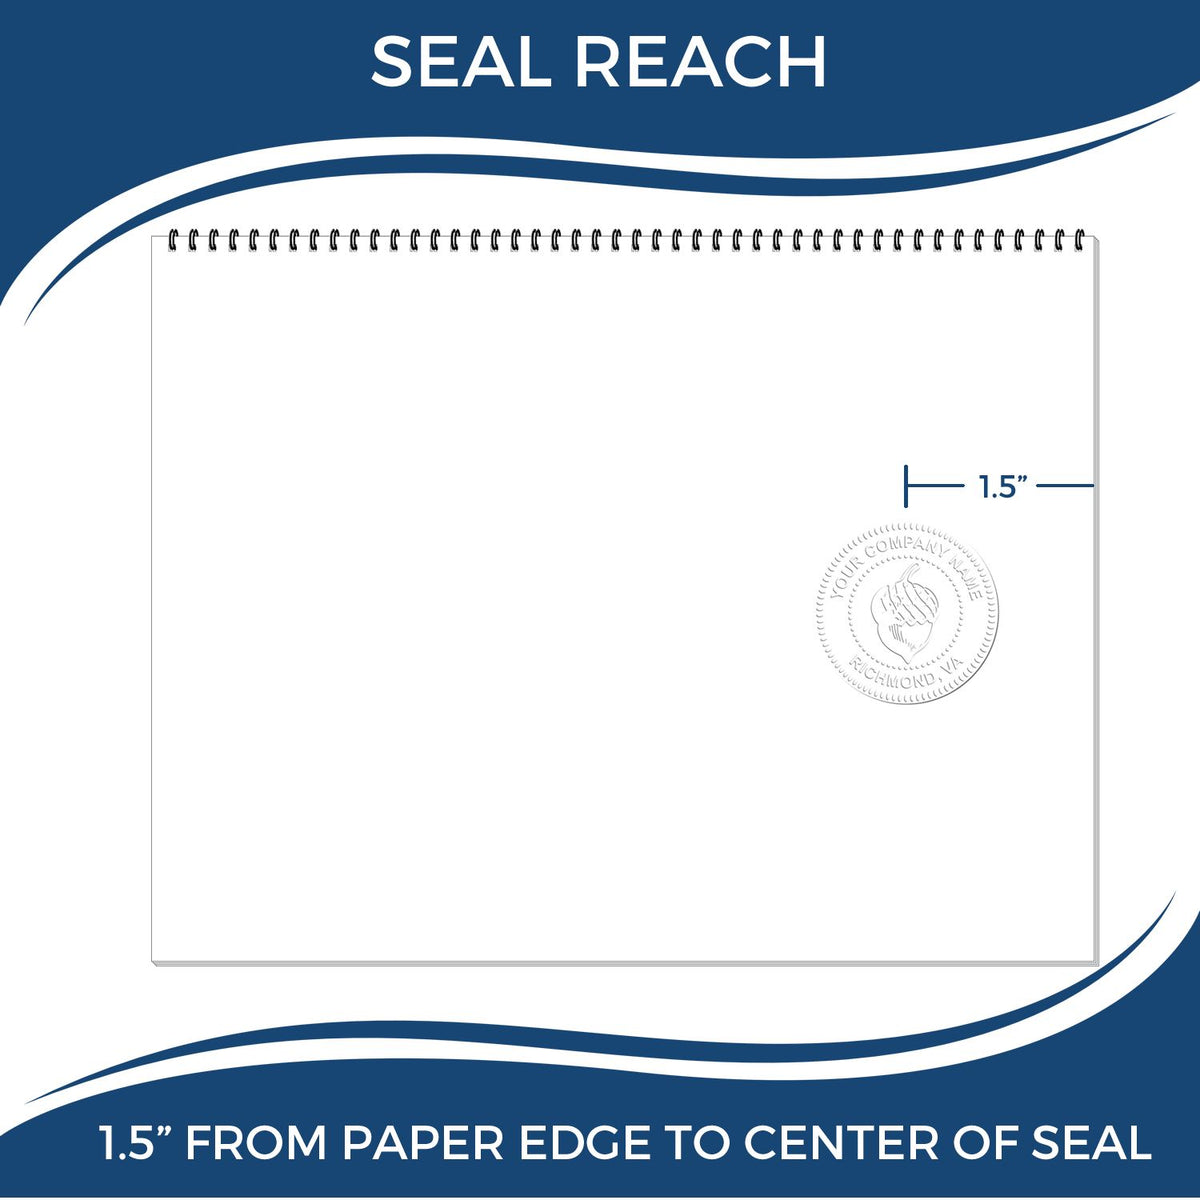 An infographic showing the seal reach which is represented by a ruler and a miniature seal image of the State of Utah Architectural Seal Embosser